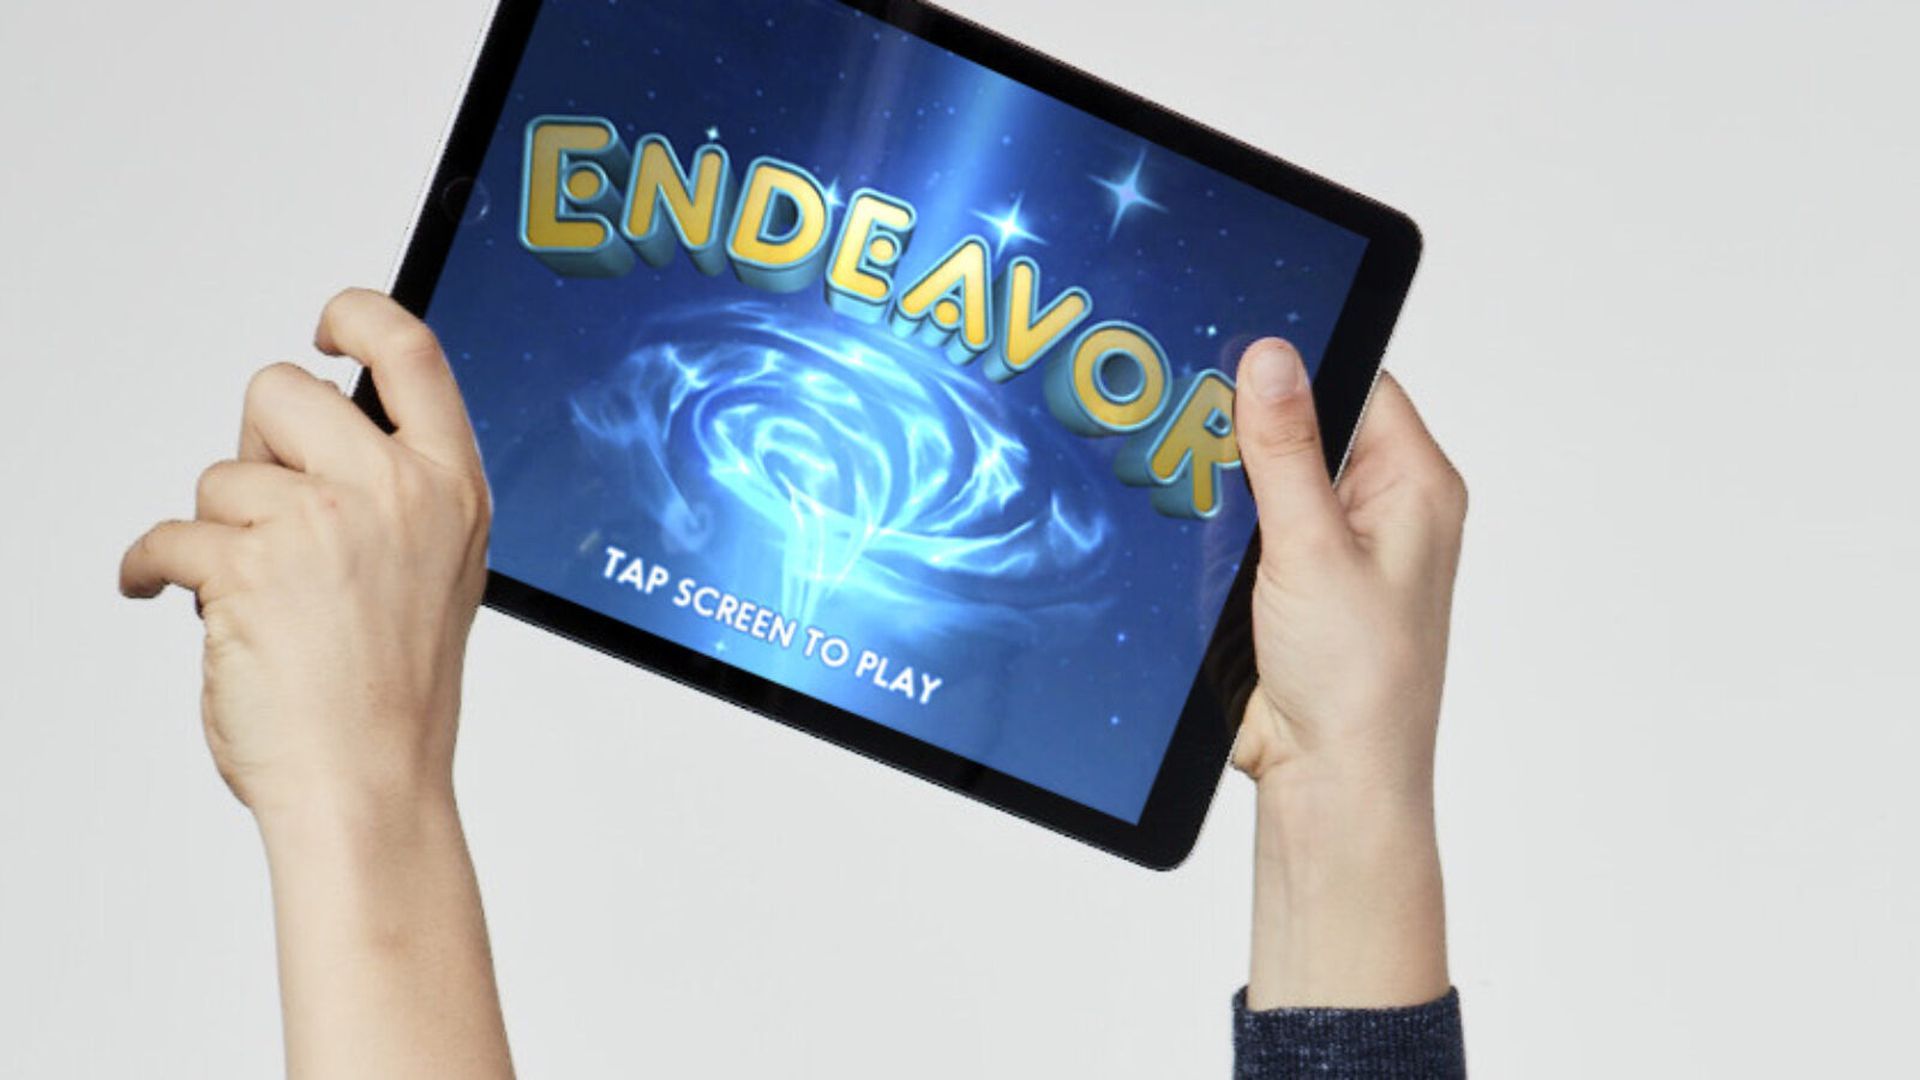 This image shows a person holding an iPad with the word "Endeavor" on it 